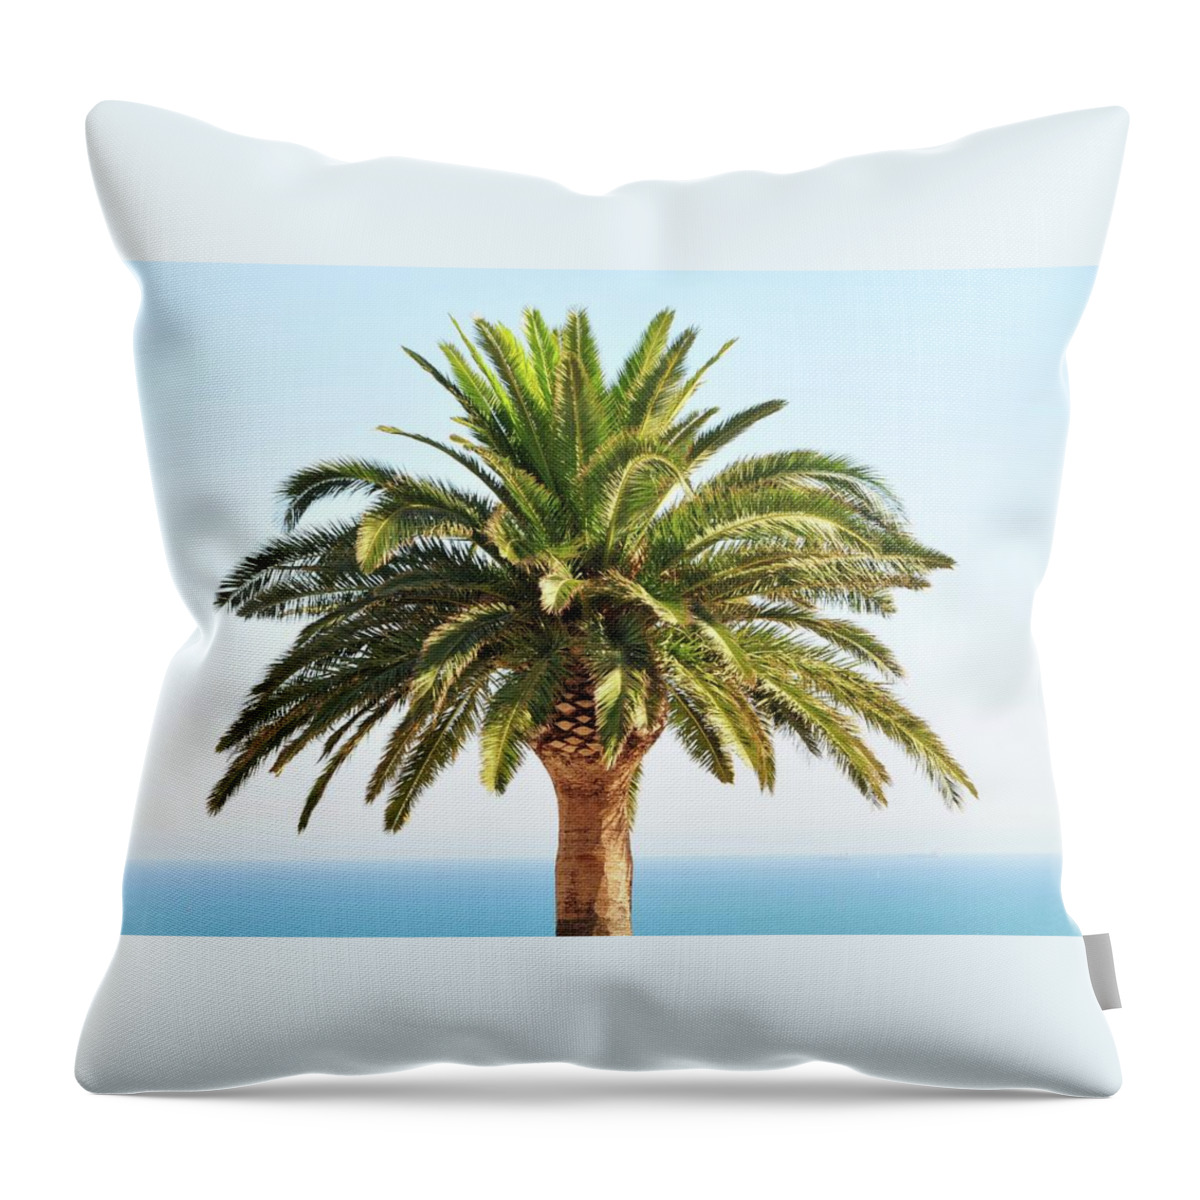 Clear Sky Throw Pillow featuring the photograph Mediterranean Palm Tree by Nicolas Emery